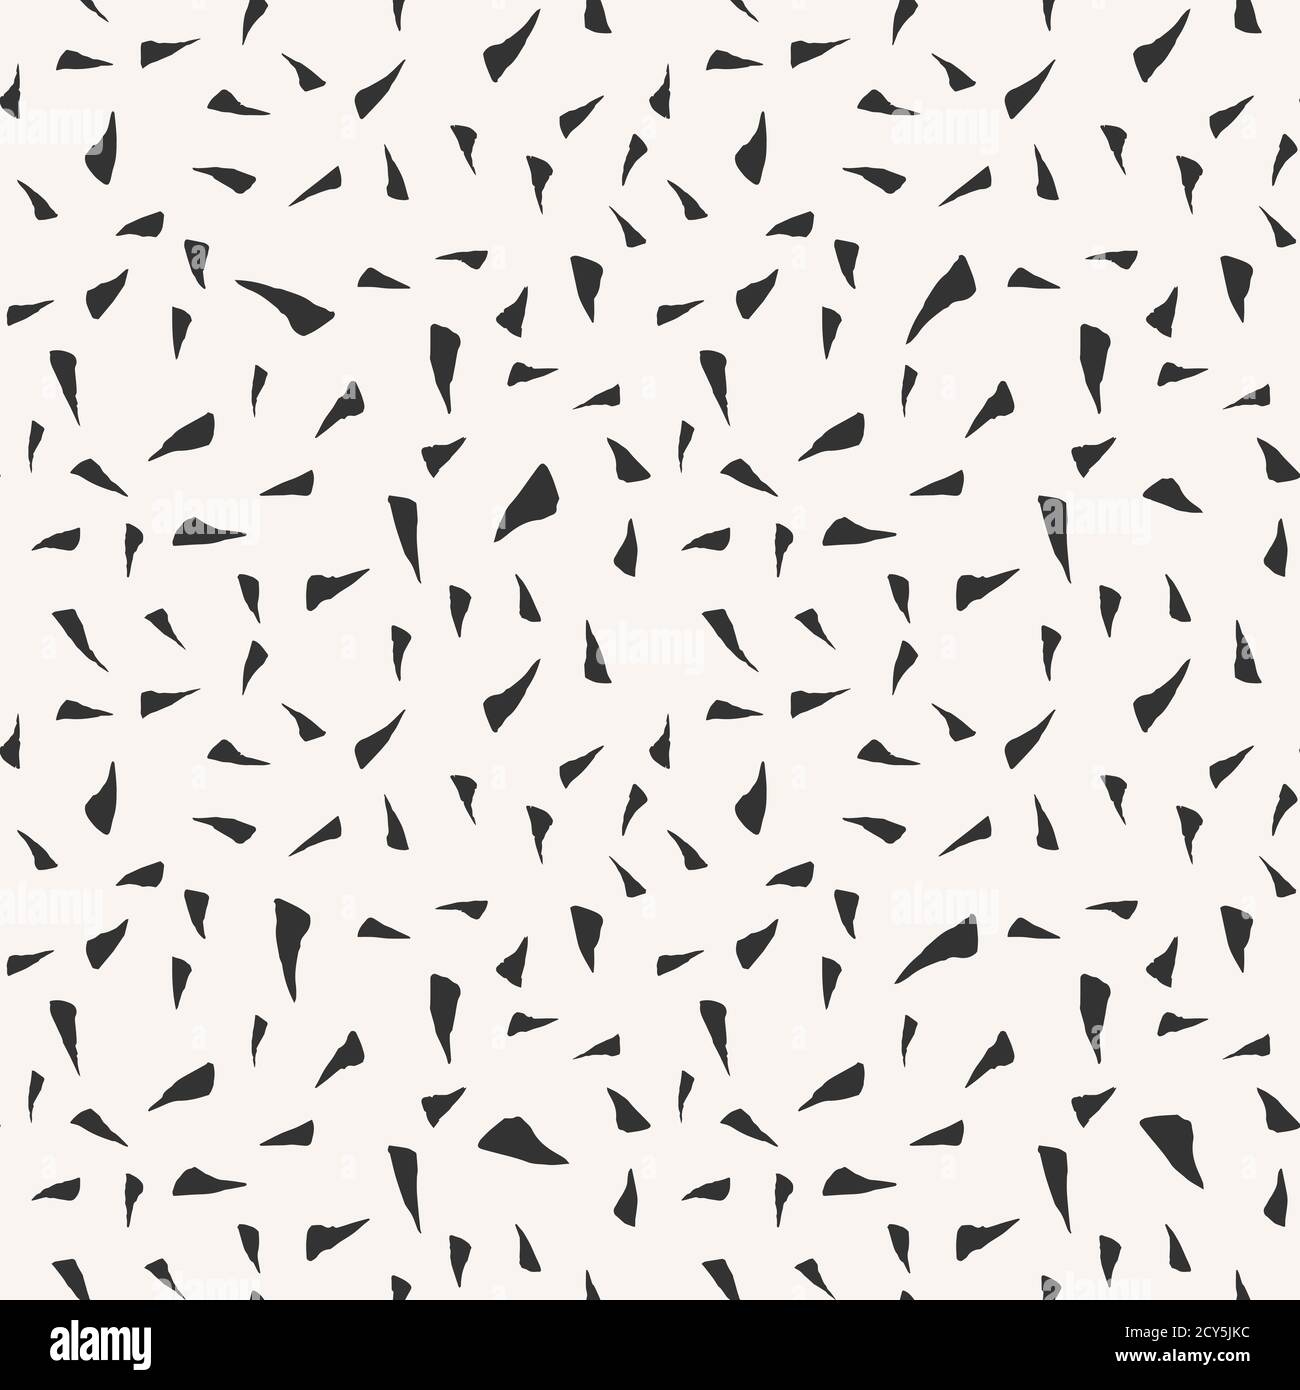 Seamless Pen And Ink Doodle Chevron Arrow Dots Seamless Pattern